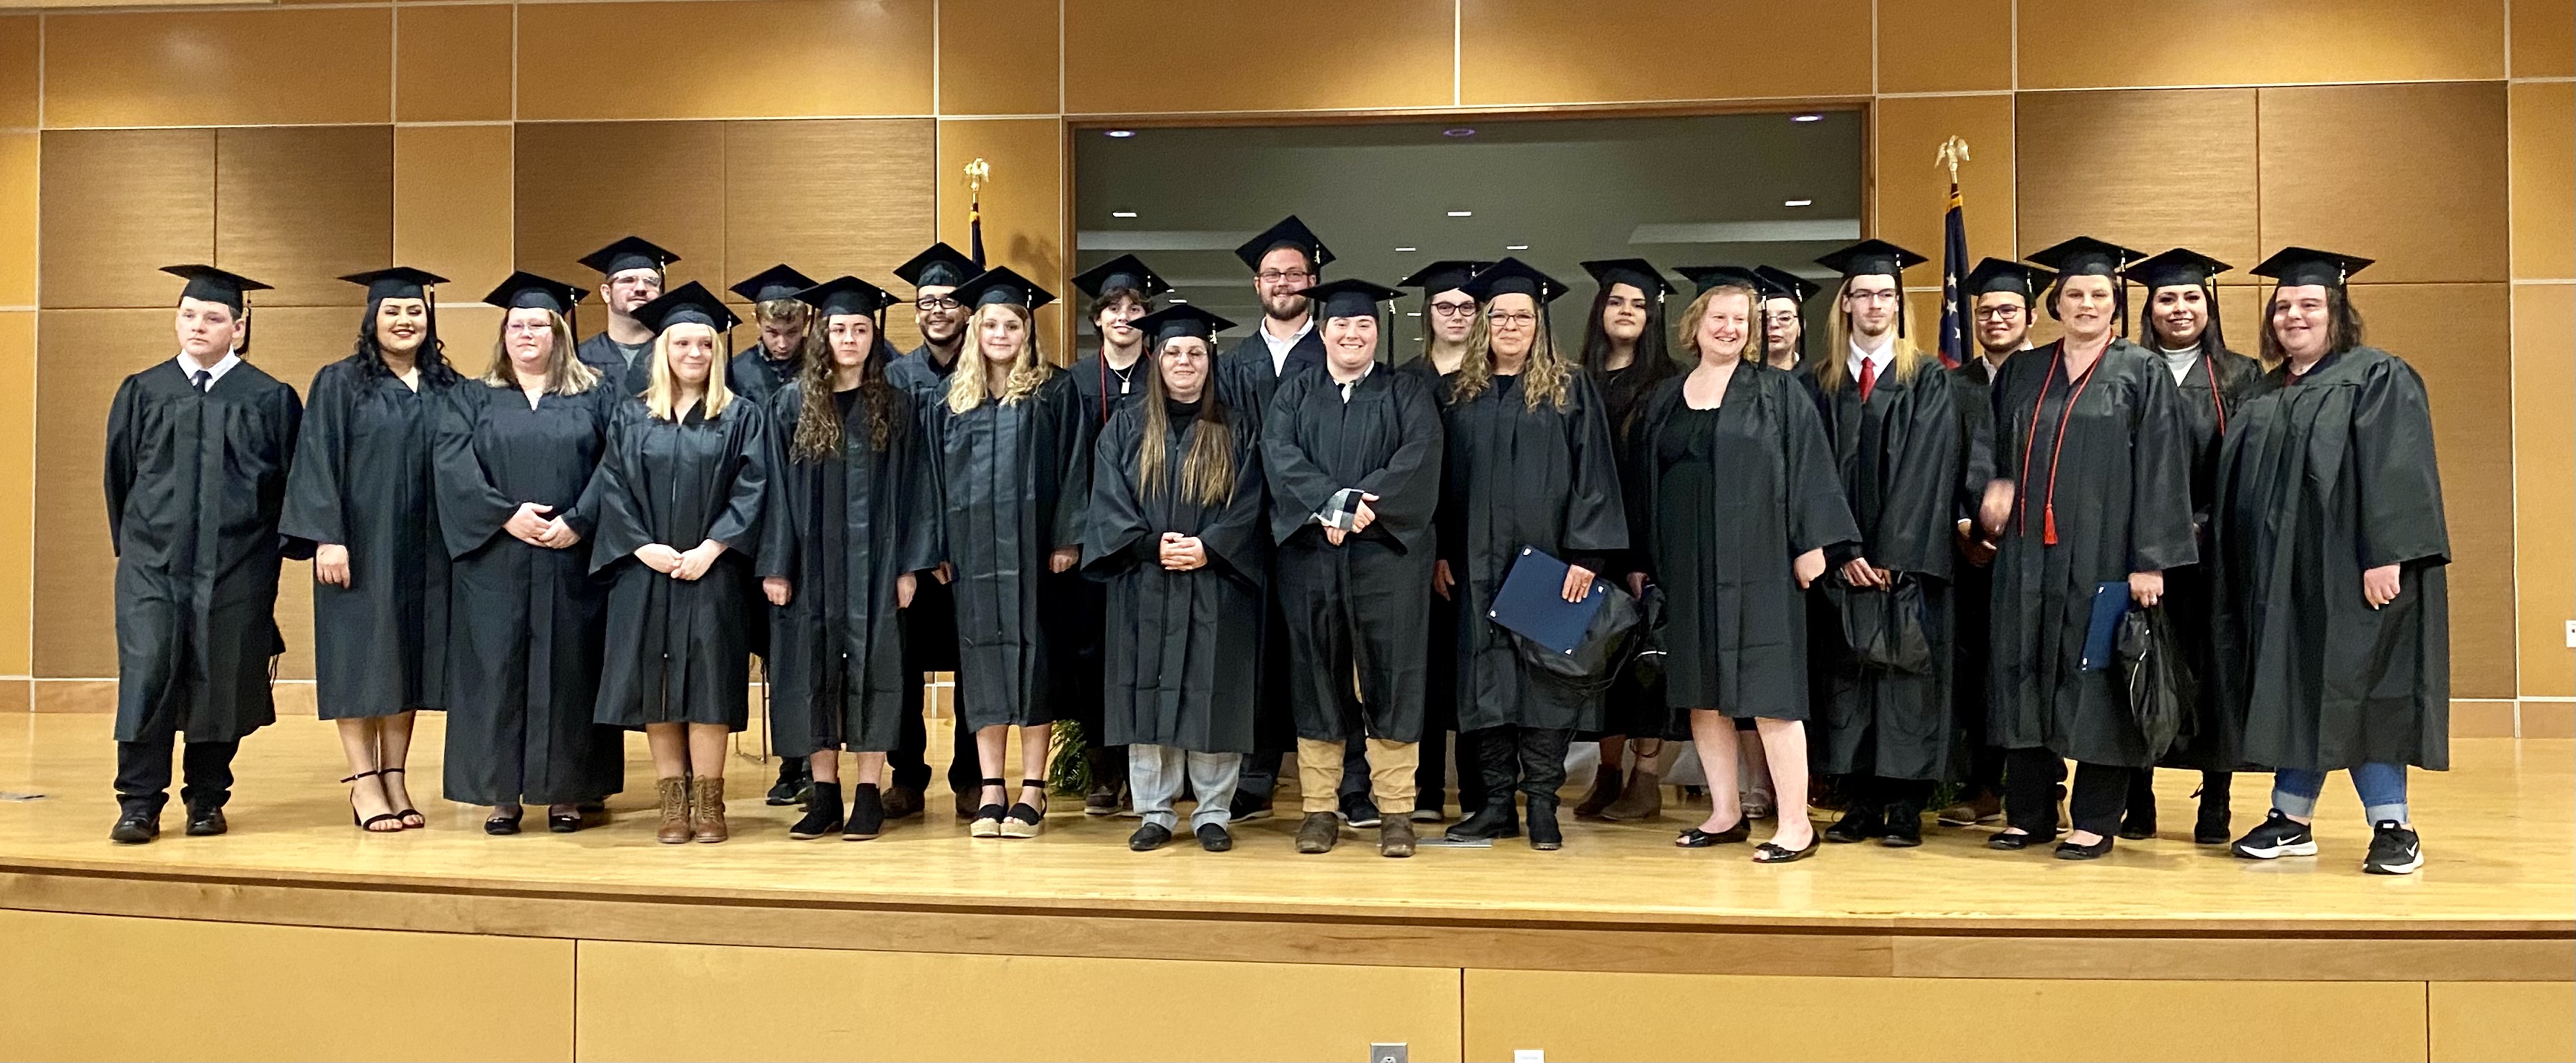 Graduates of GNTC’s Adult Education program line up for a photo after the commencement ceremony held on the Gordon County Campus for students who have earned their General Educational Development® (GED®) diplomas.